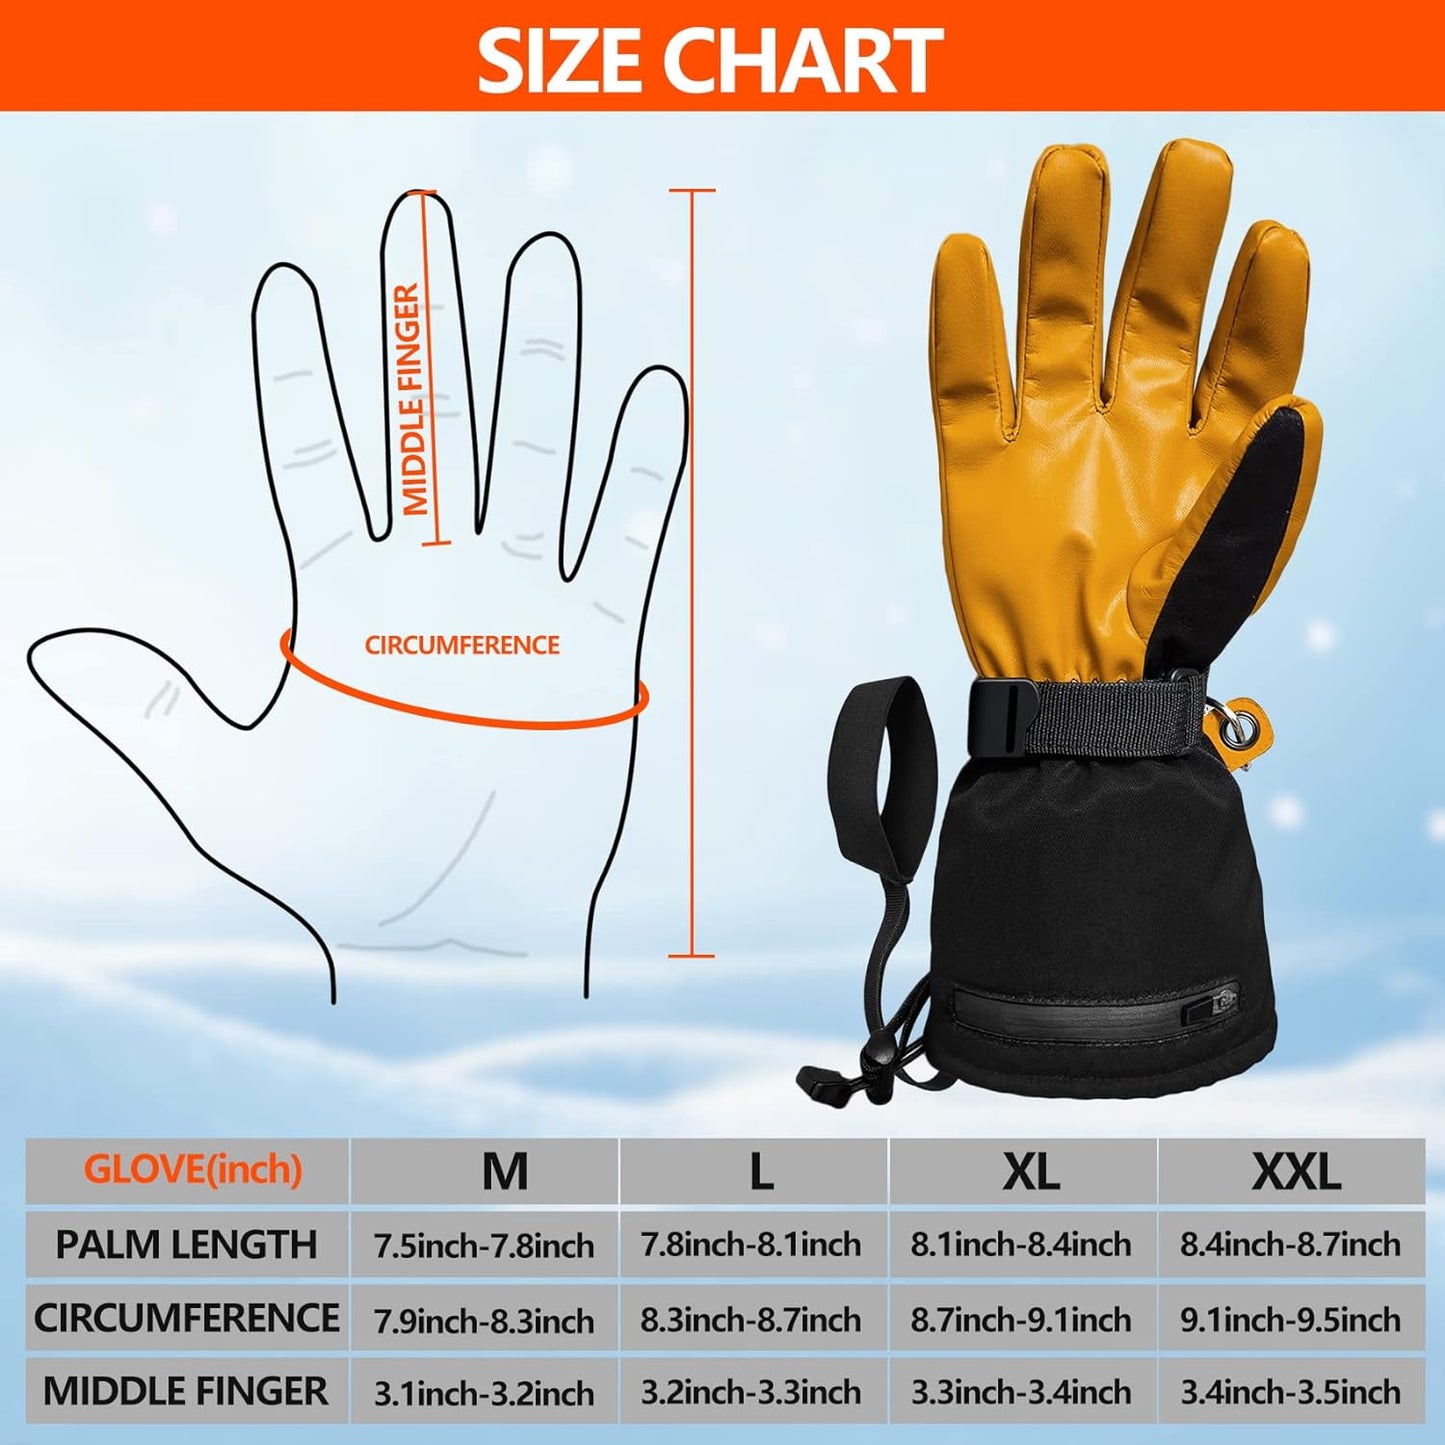 Hsility Heated Gloves for Men Rechargeable Automatic Thermostat Motorcycle Gloves Waterproof for Hiking /Fishing/ Skiing/ Camping